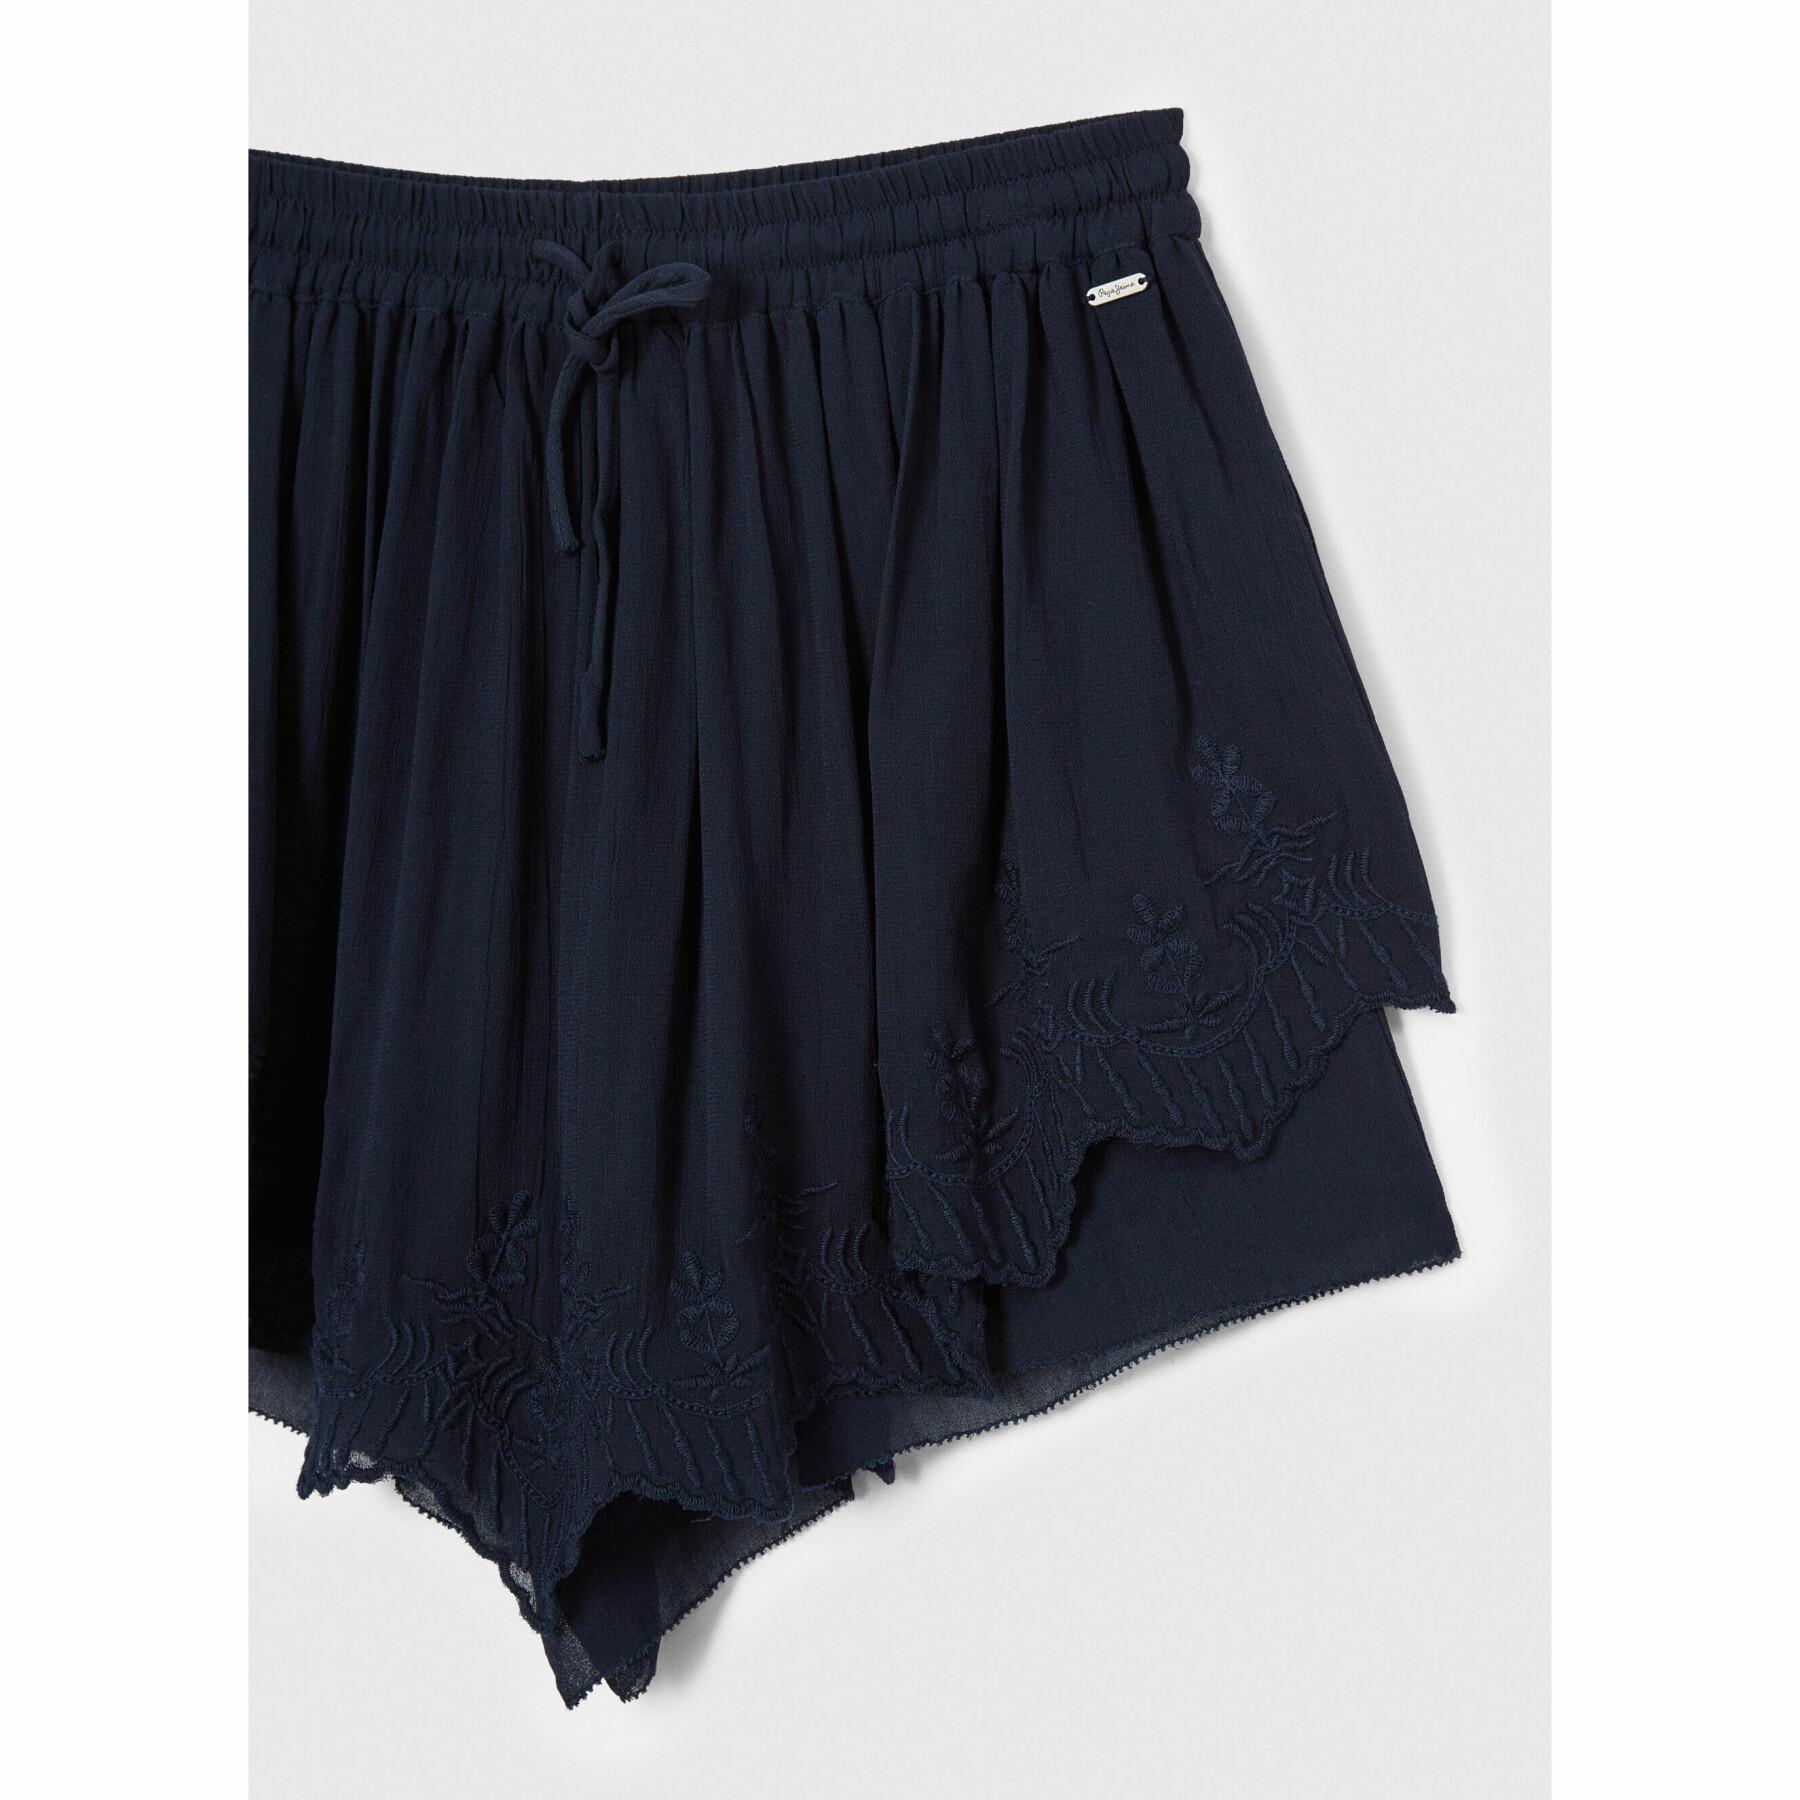 Dames short Pepe Jeans Florence